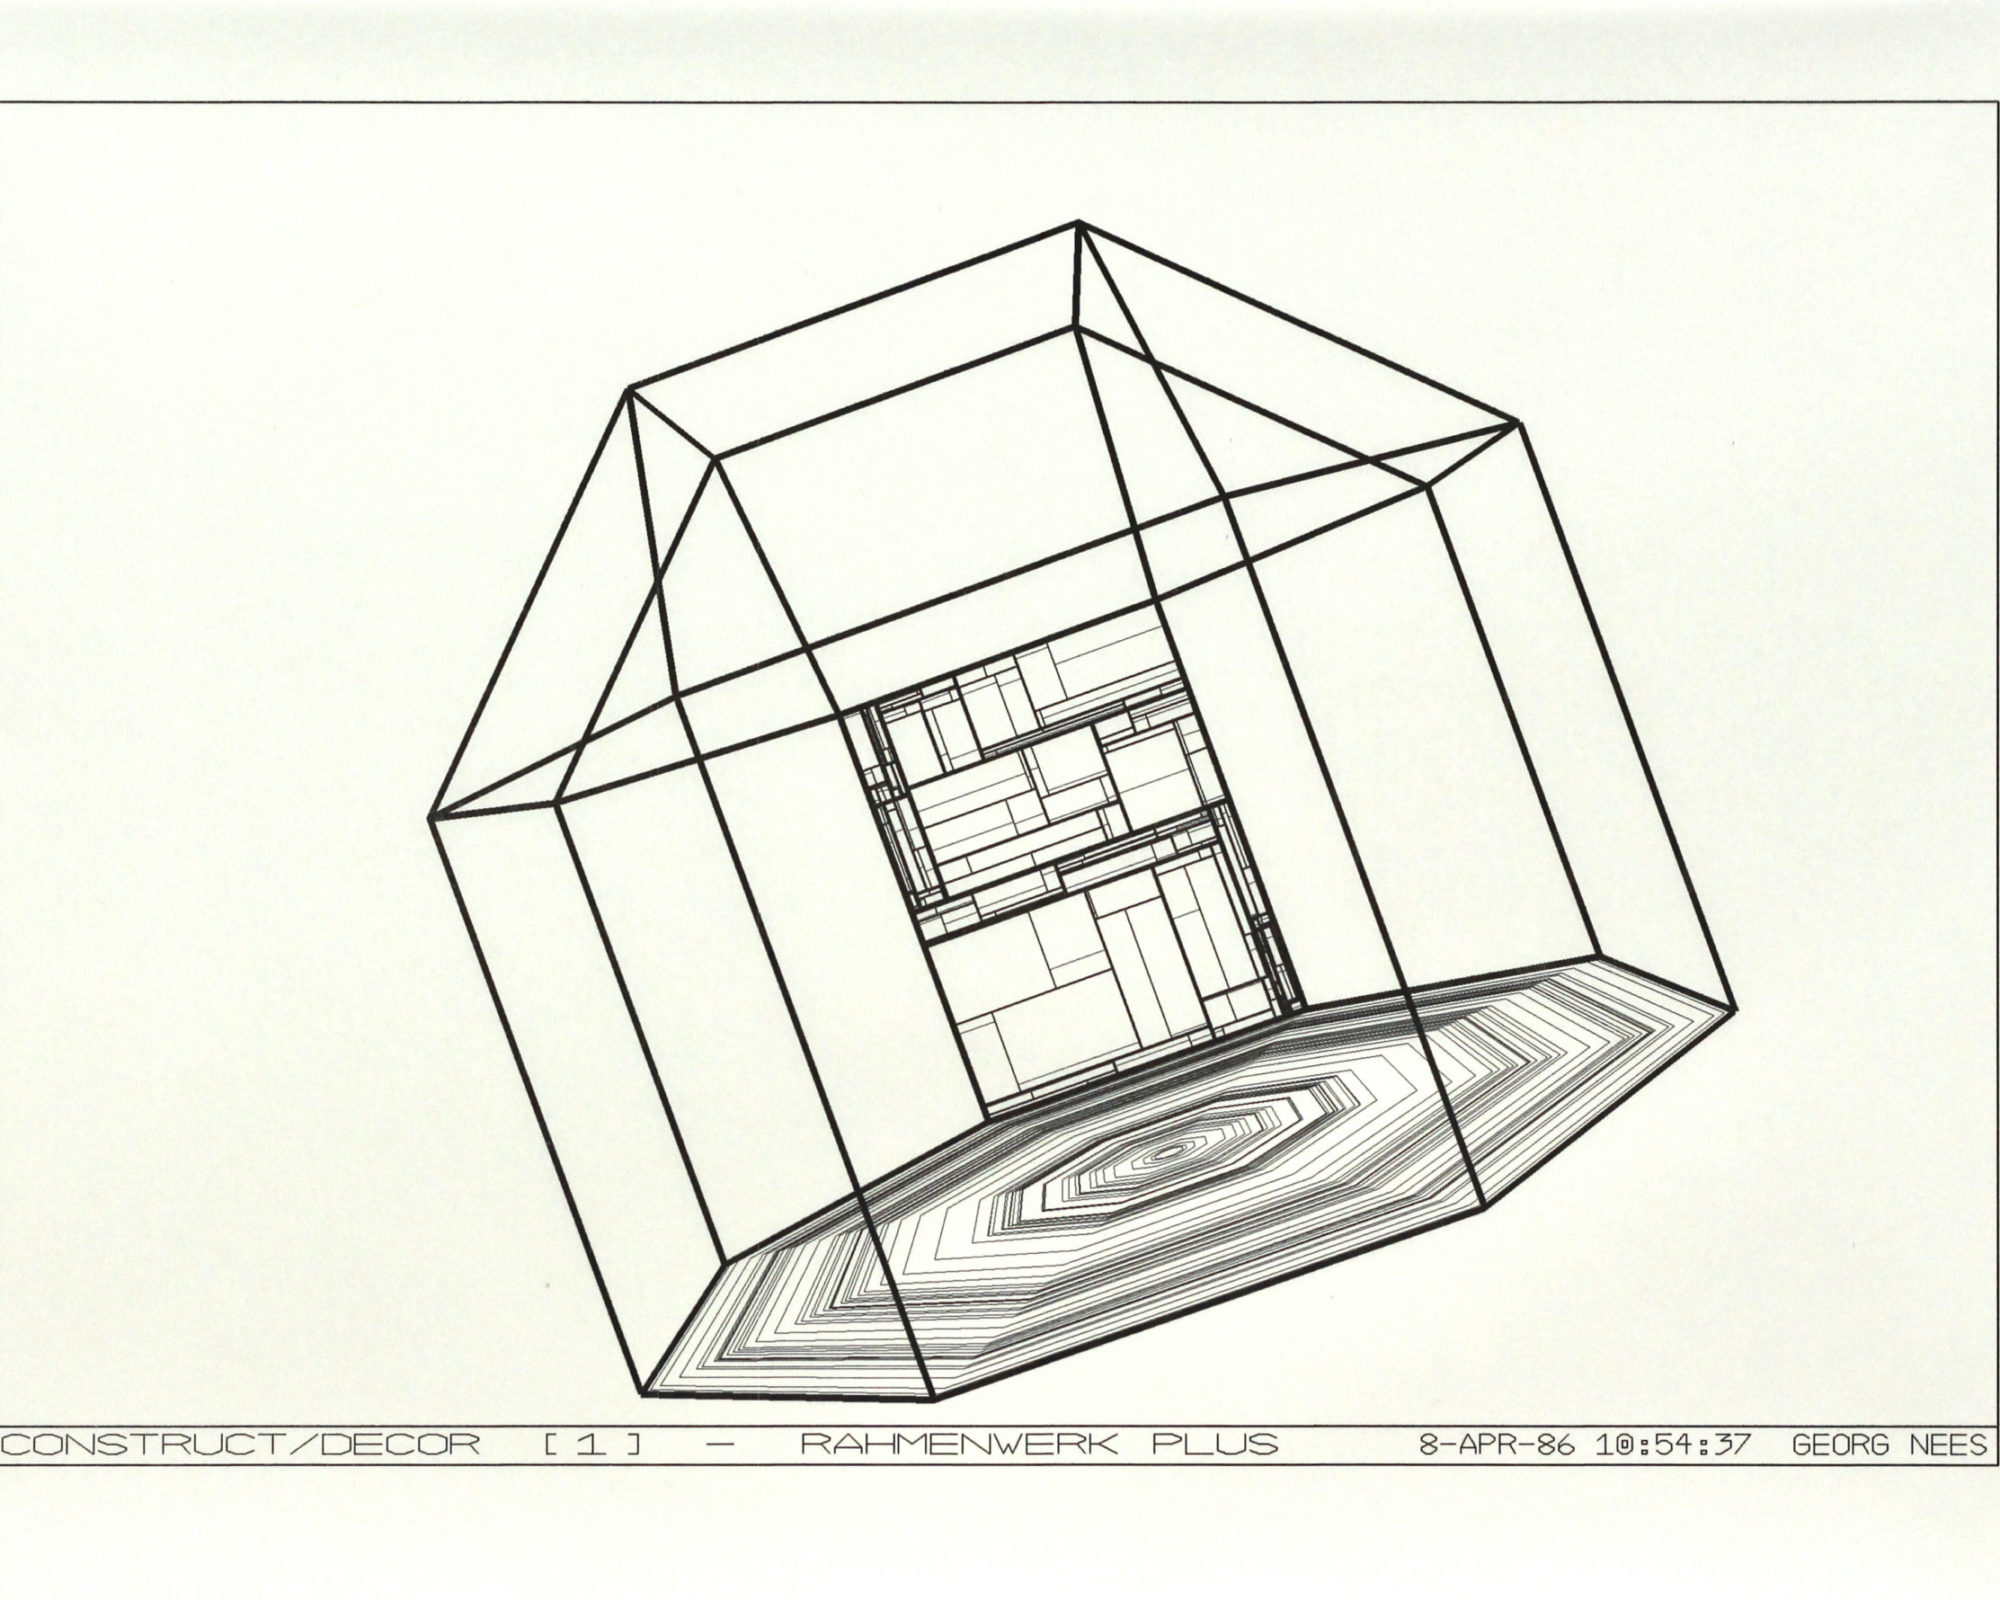 Georg Nees, Construct/Decor [1] Rahmwerk Plus, laser print, 25 x 36 cm, 8 Apr 86, signed and dated as part of the print Georg Nees, edition of 4.